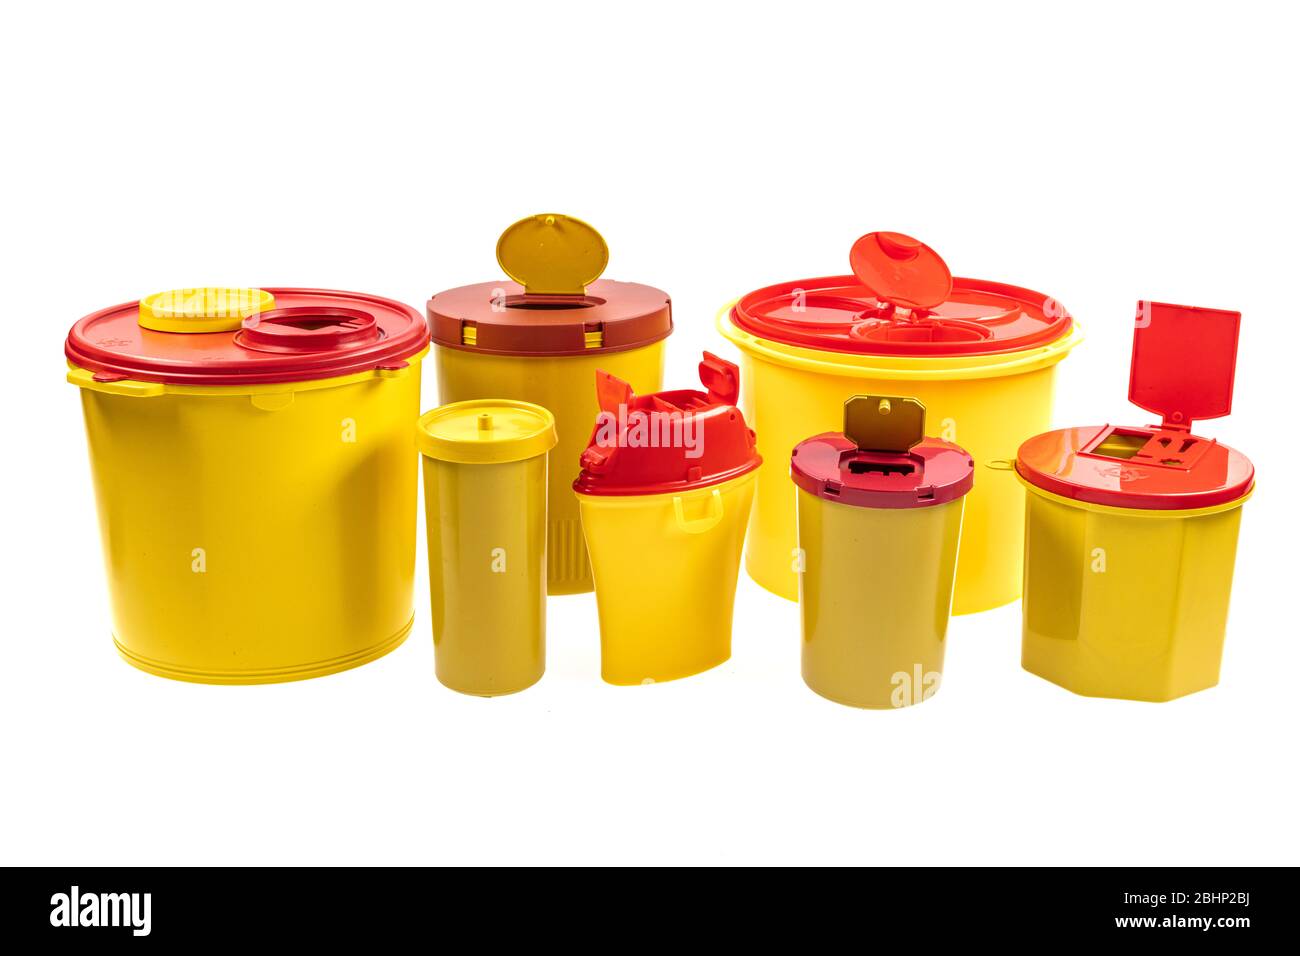 When should you replace your Medical Waste Bins?